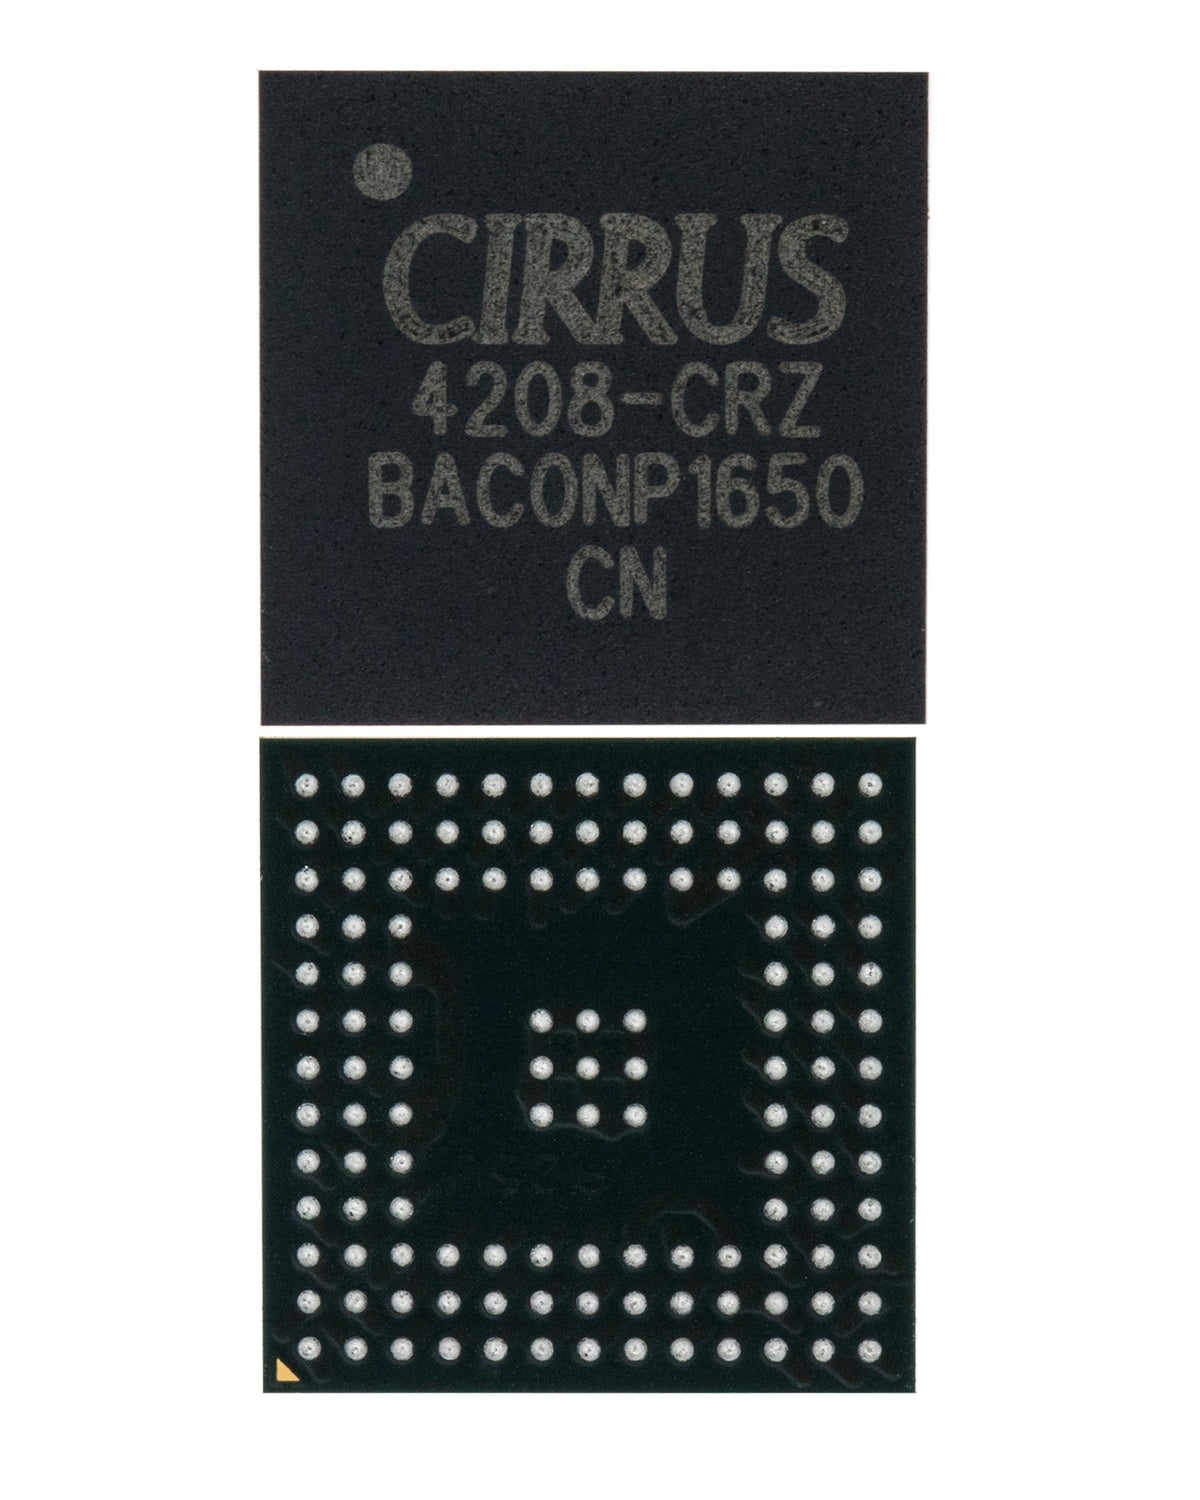 SOUND CARD CONTROLLER IC COMPATIBLE WITH MACBOOK PRO RETINA 13" / 15" A1502 / A1398  (LATE 2013 / MID 2014 / EARLY 2015 / MID 2015) (CIRRUS CS4208-CRZR: 353S4080 / U6201: BGA-129 PIN)